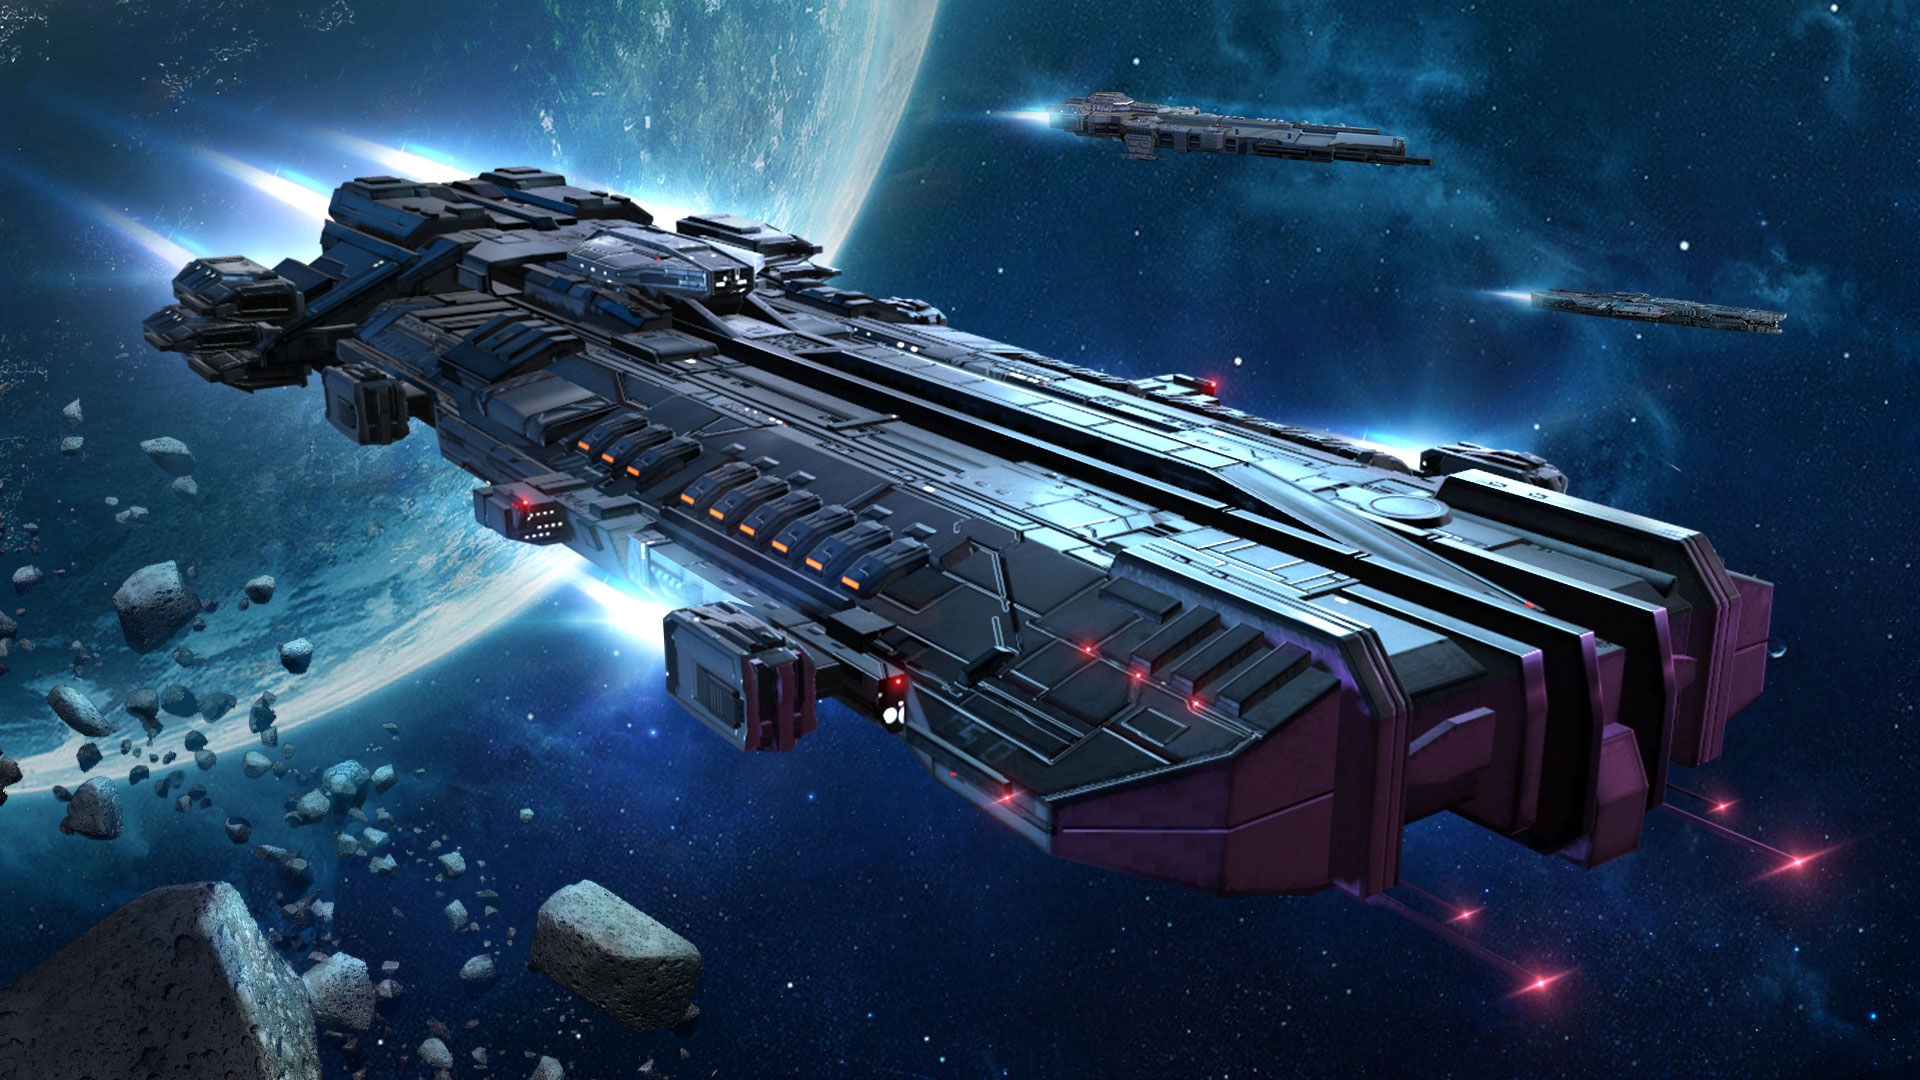 Infinite Galaxy aims to be the ultimate space strategy game on mobile